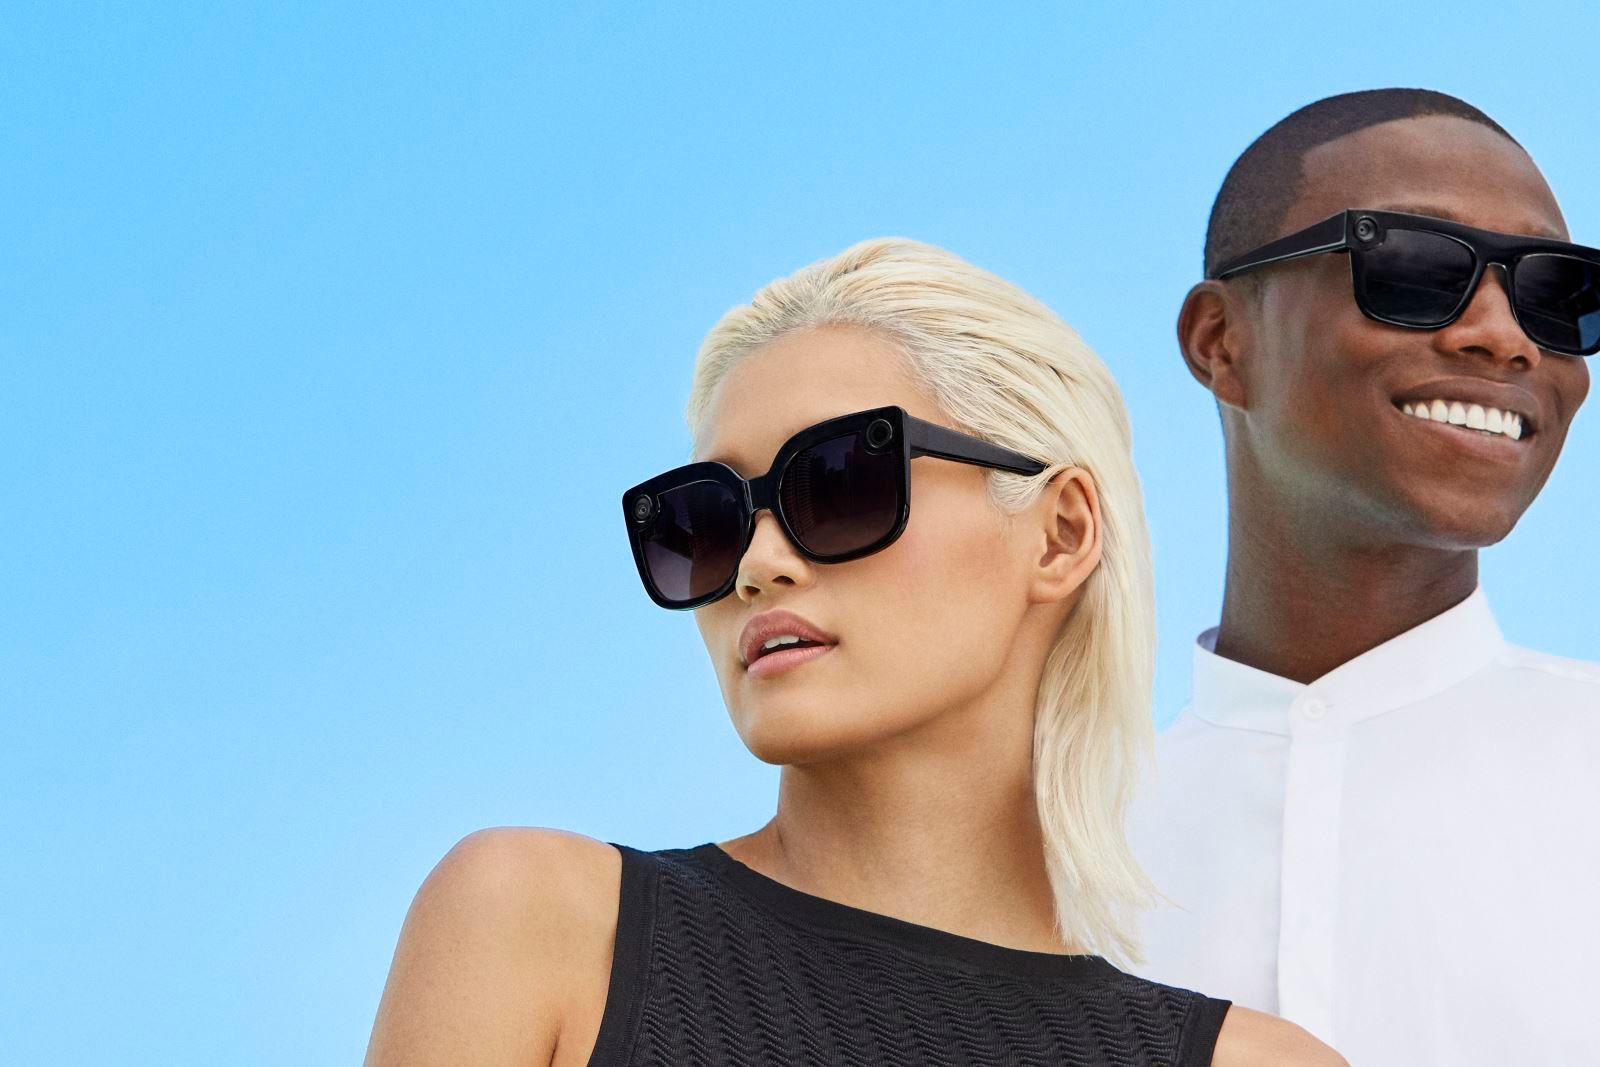 These new Snapchat Spectacles look more like normal sunglasses image 1